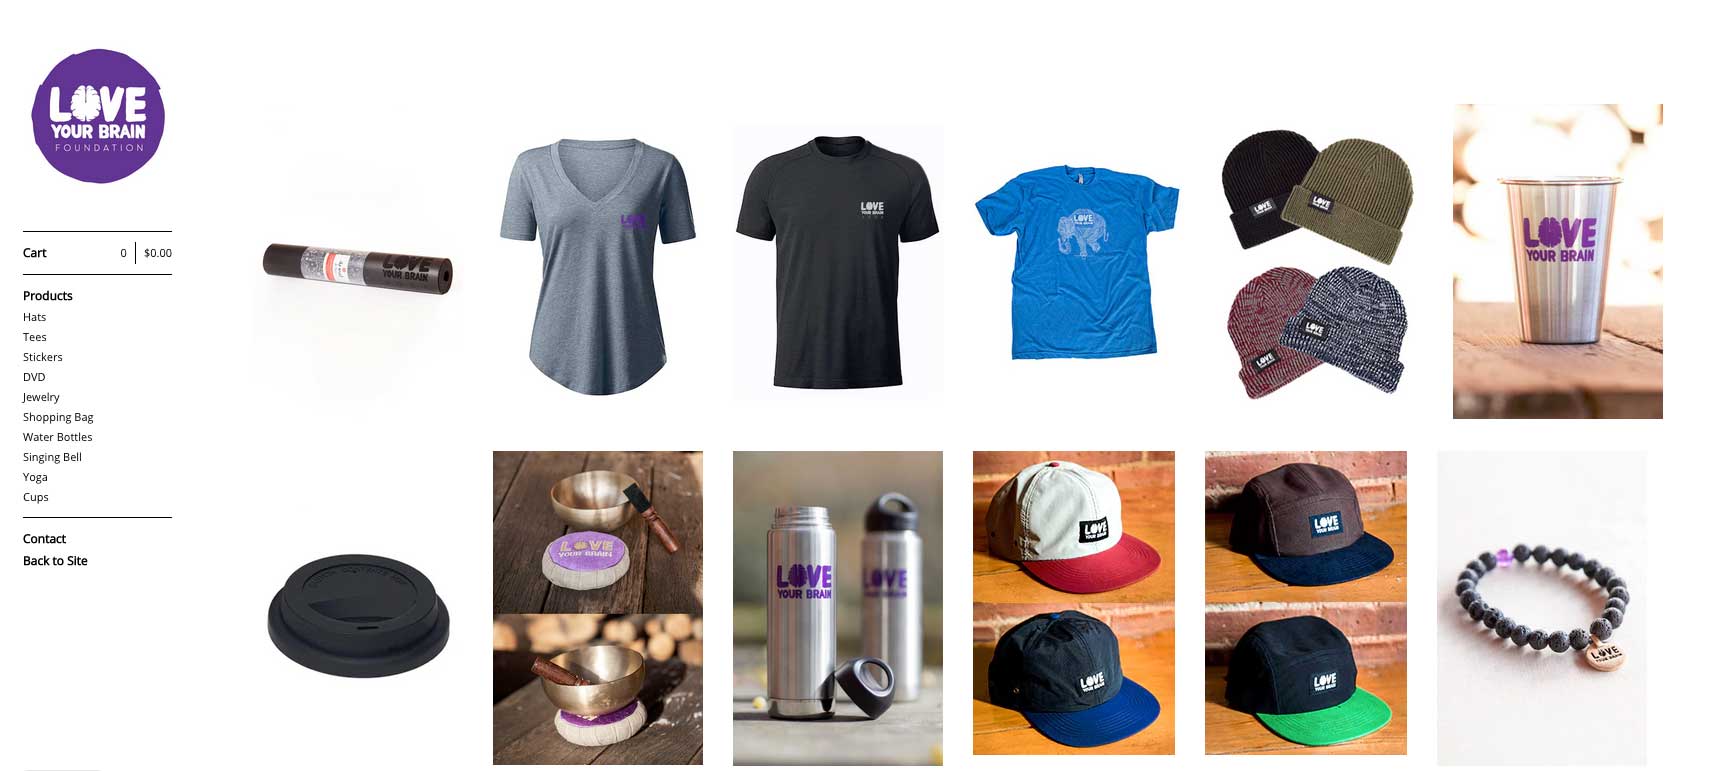 Love Your Brain Foundation’s online retail store